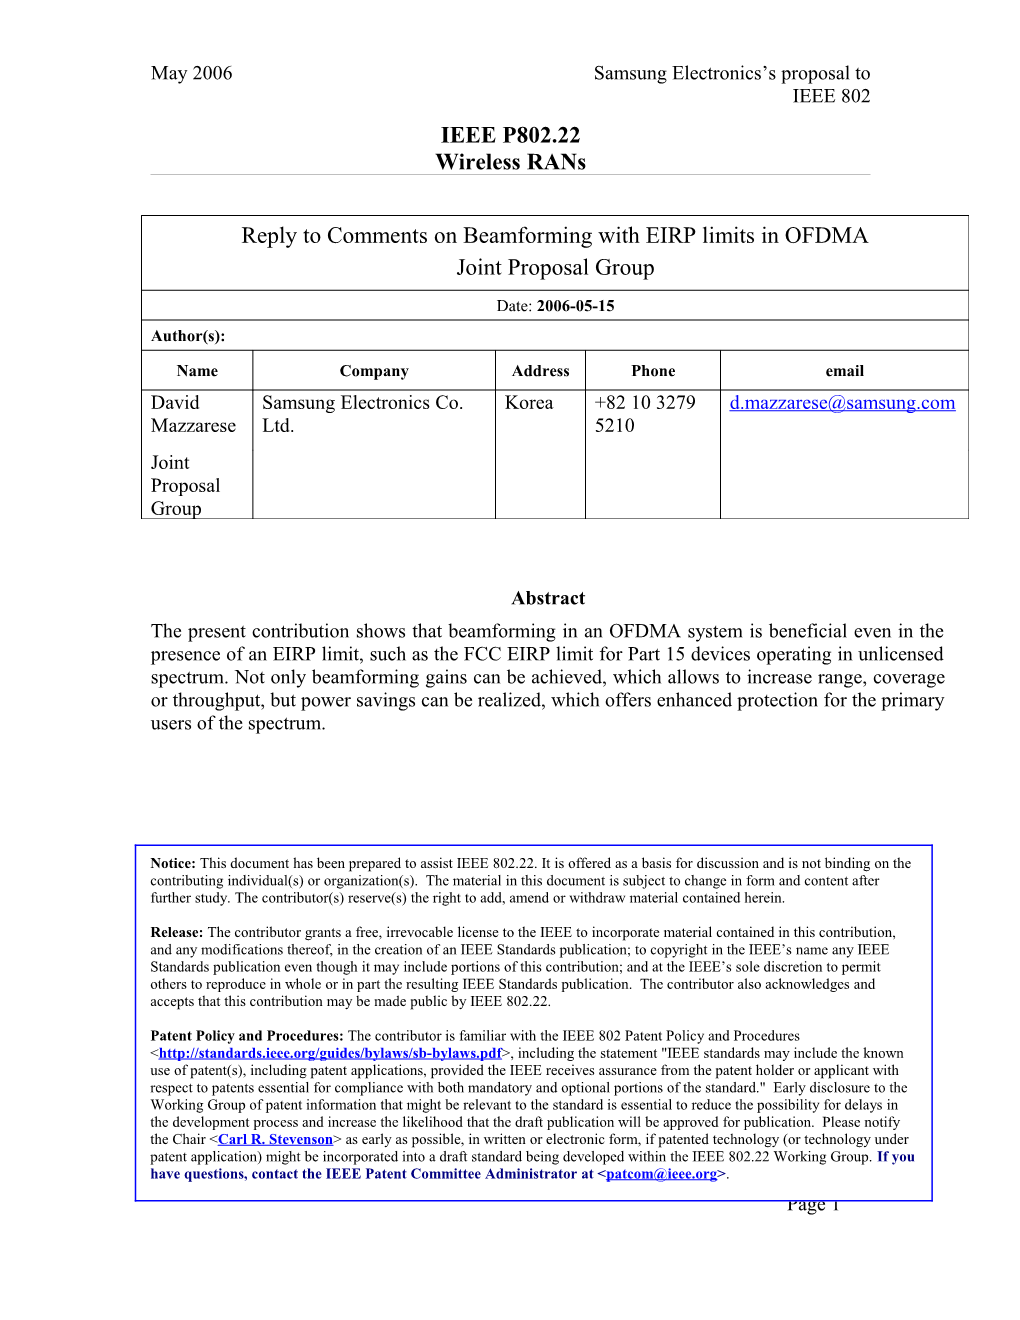 Samsung Electronics S Proposal to IEEE 802